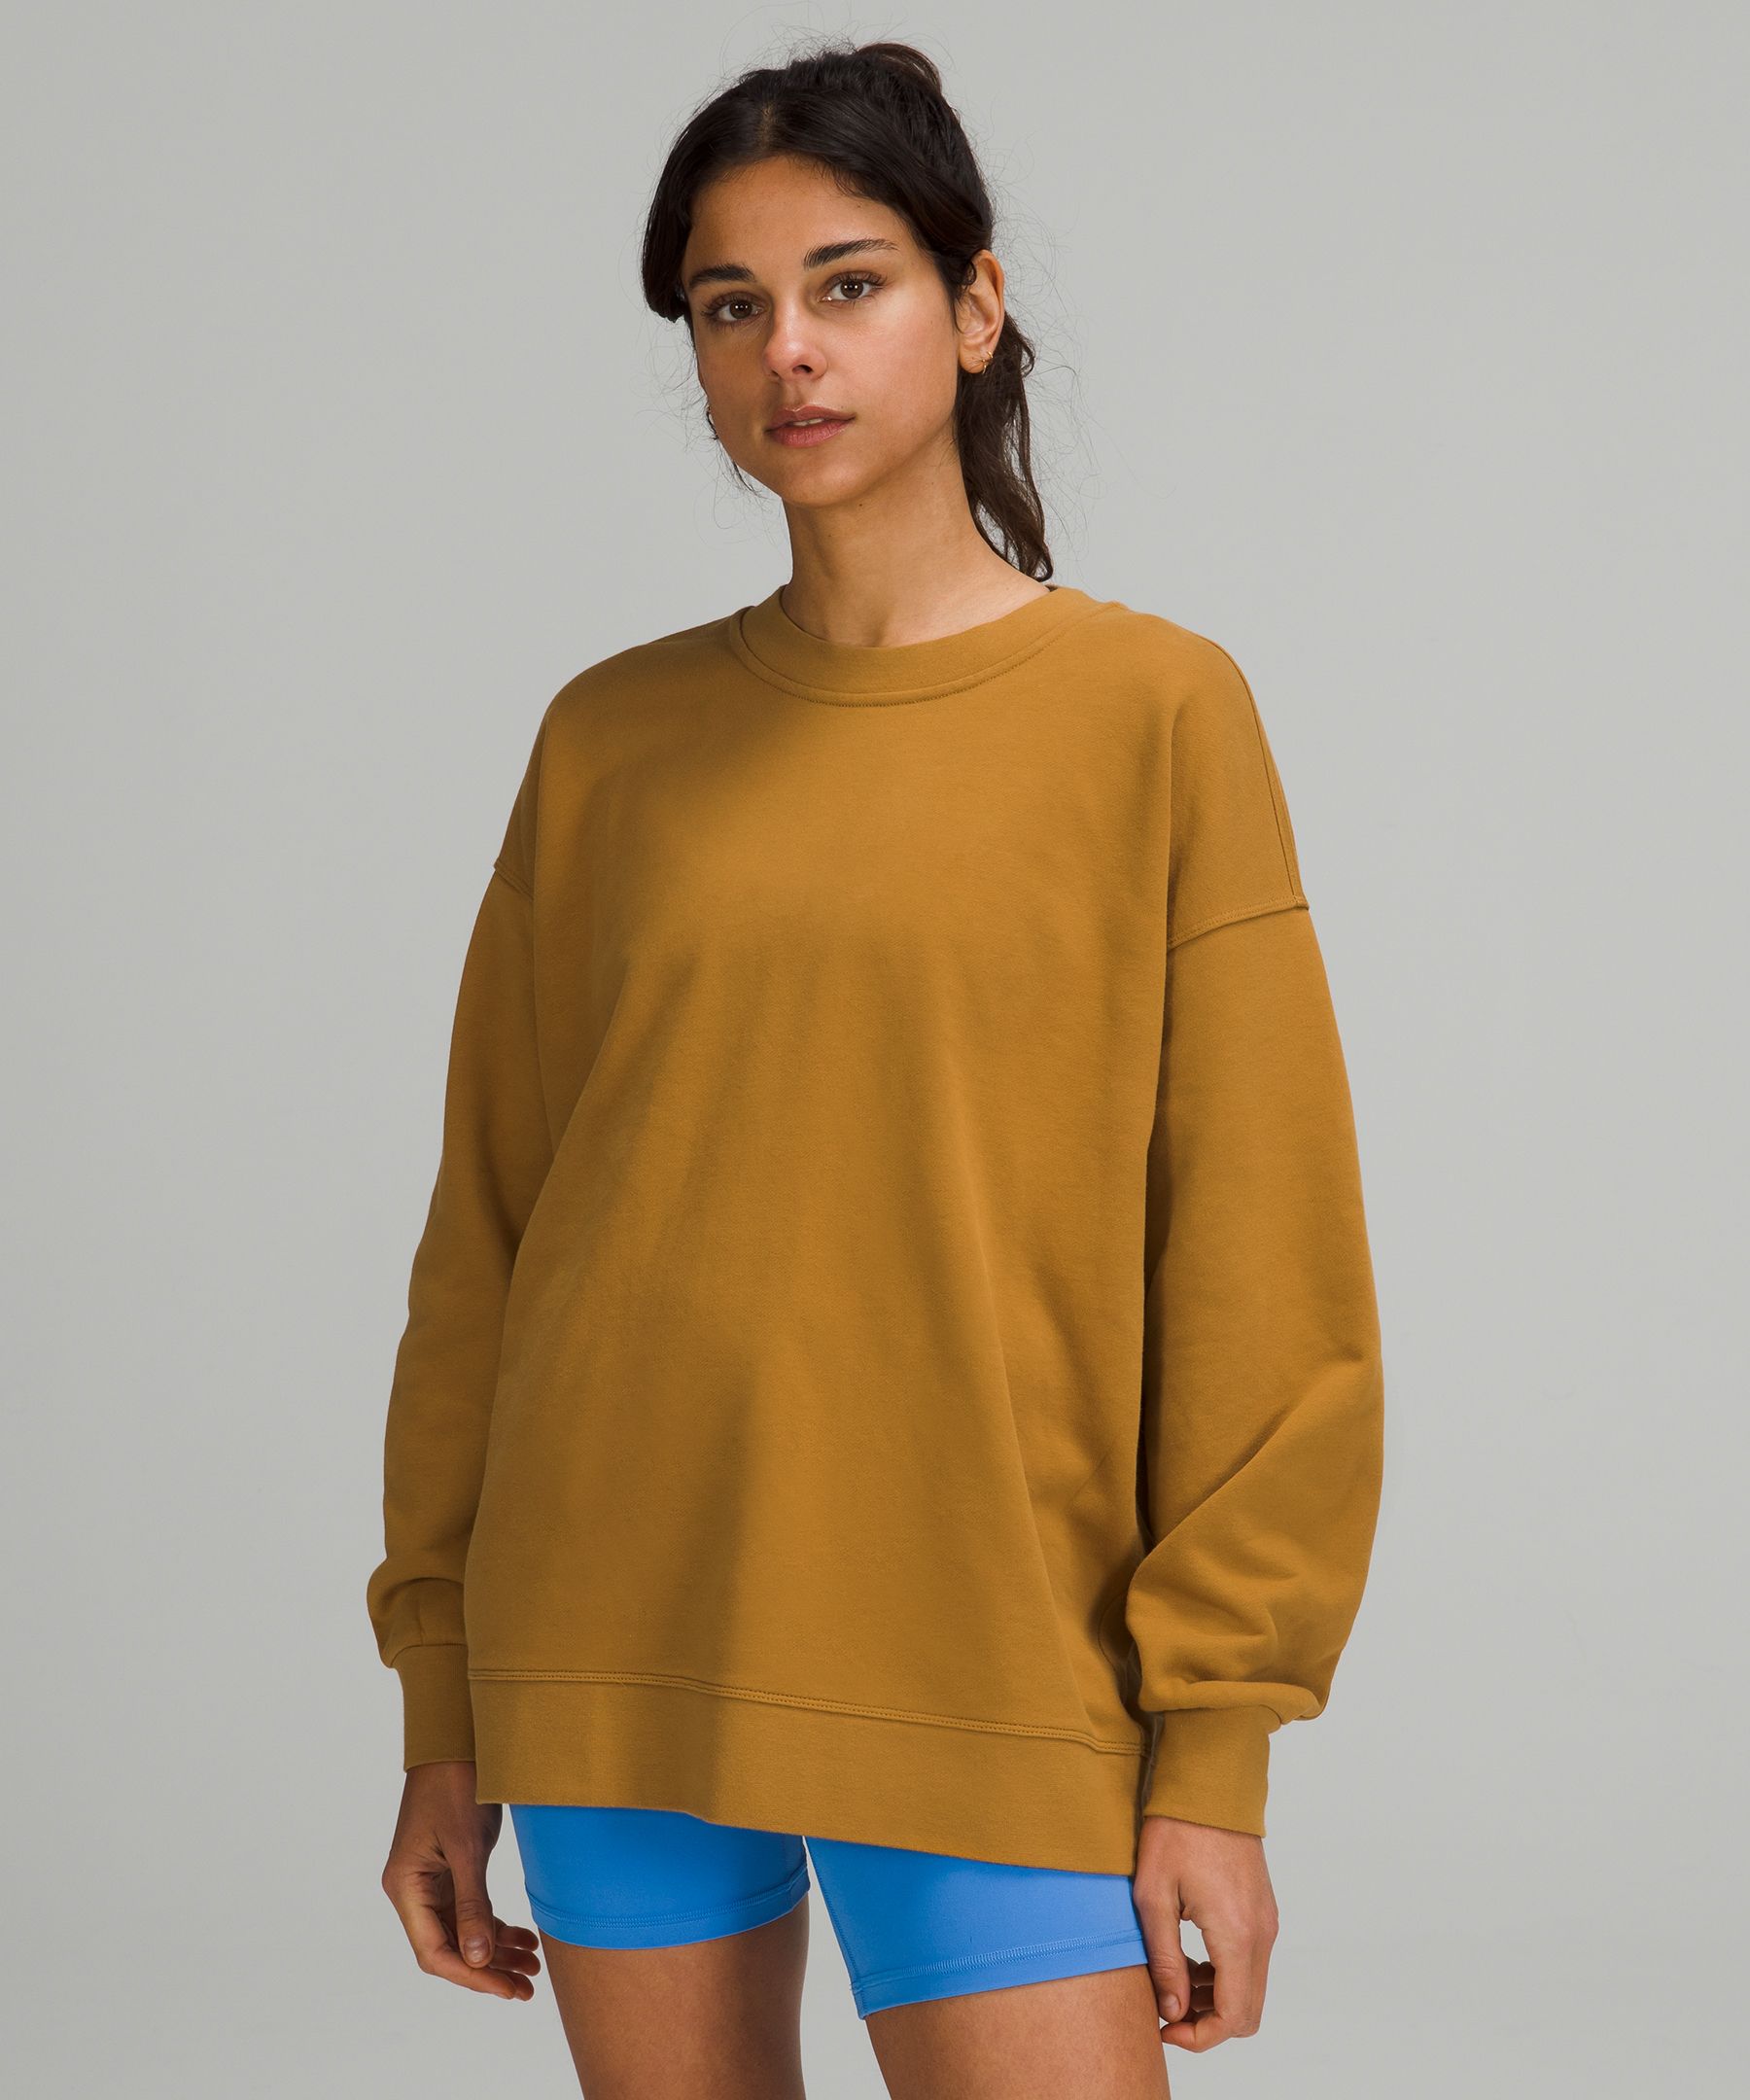 Lululemon Perfectly Oversized Crew In Spiced Bronze